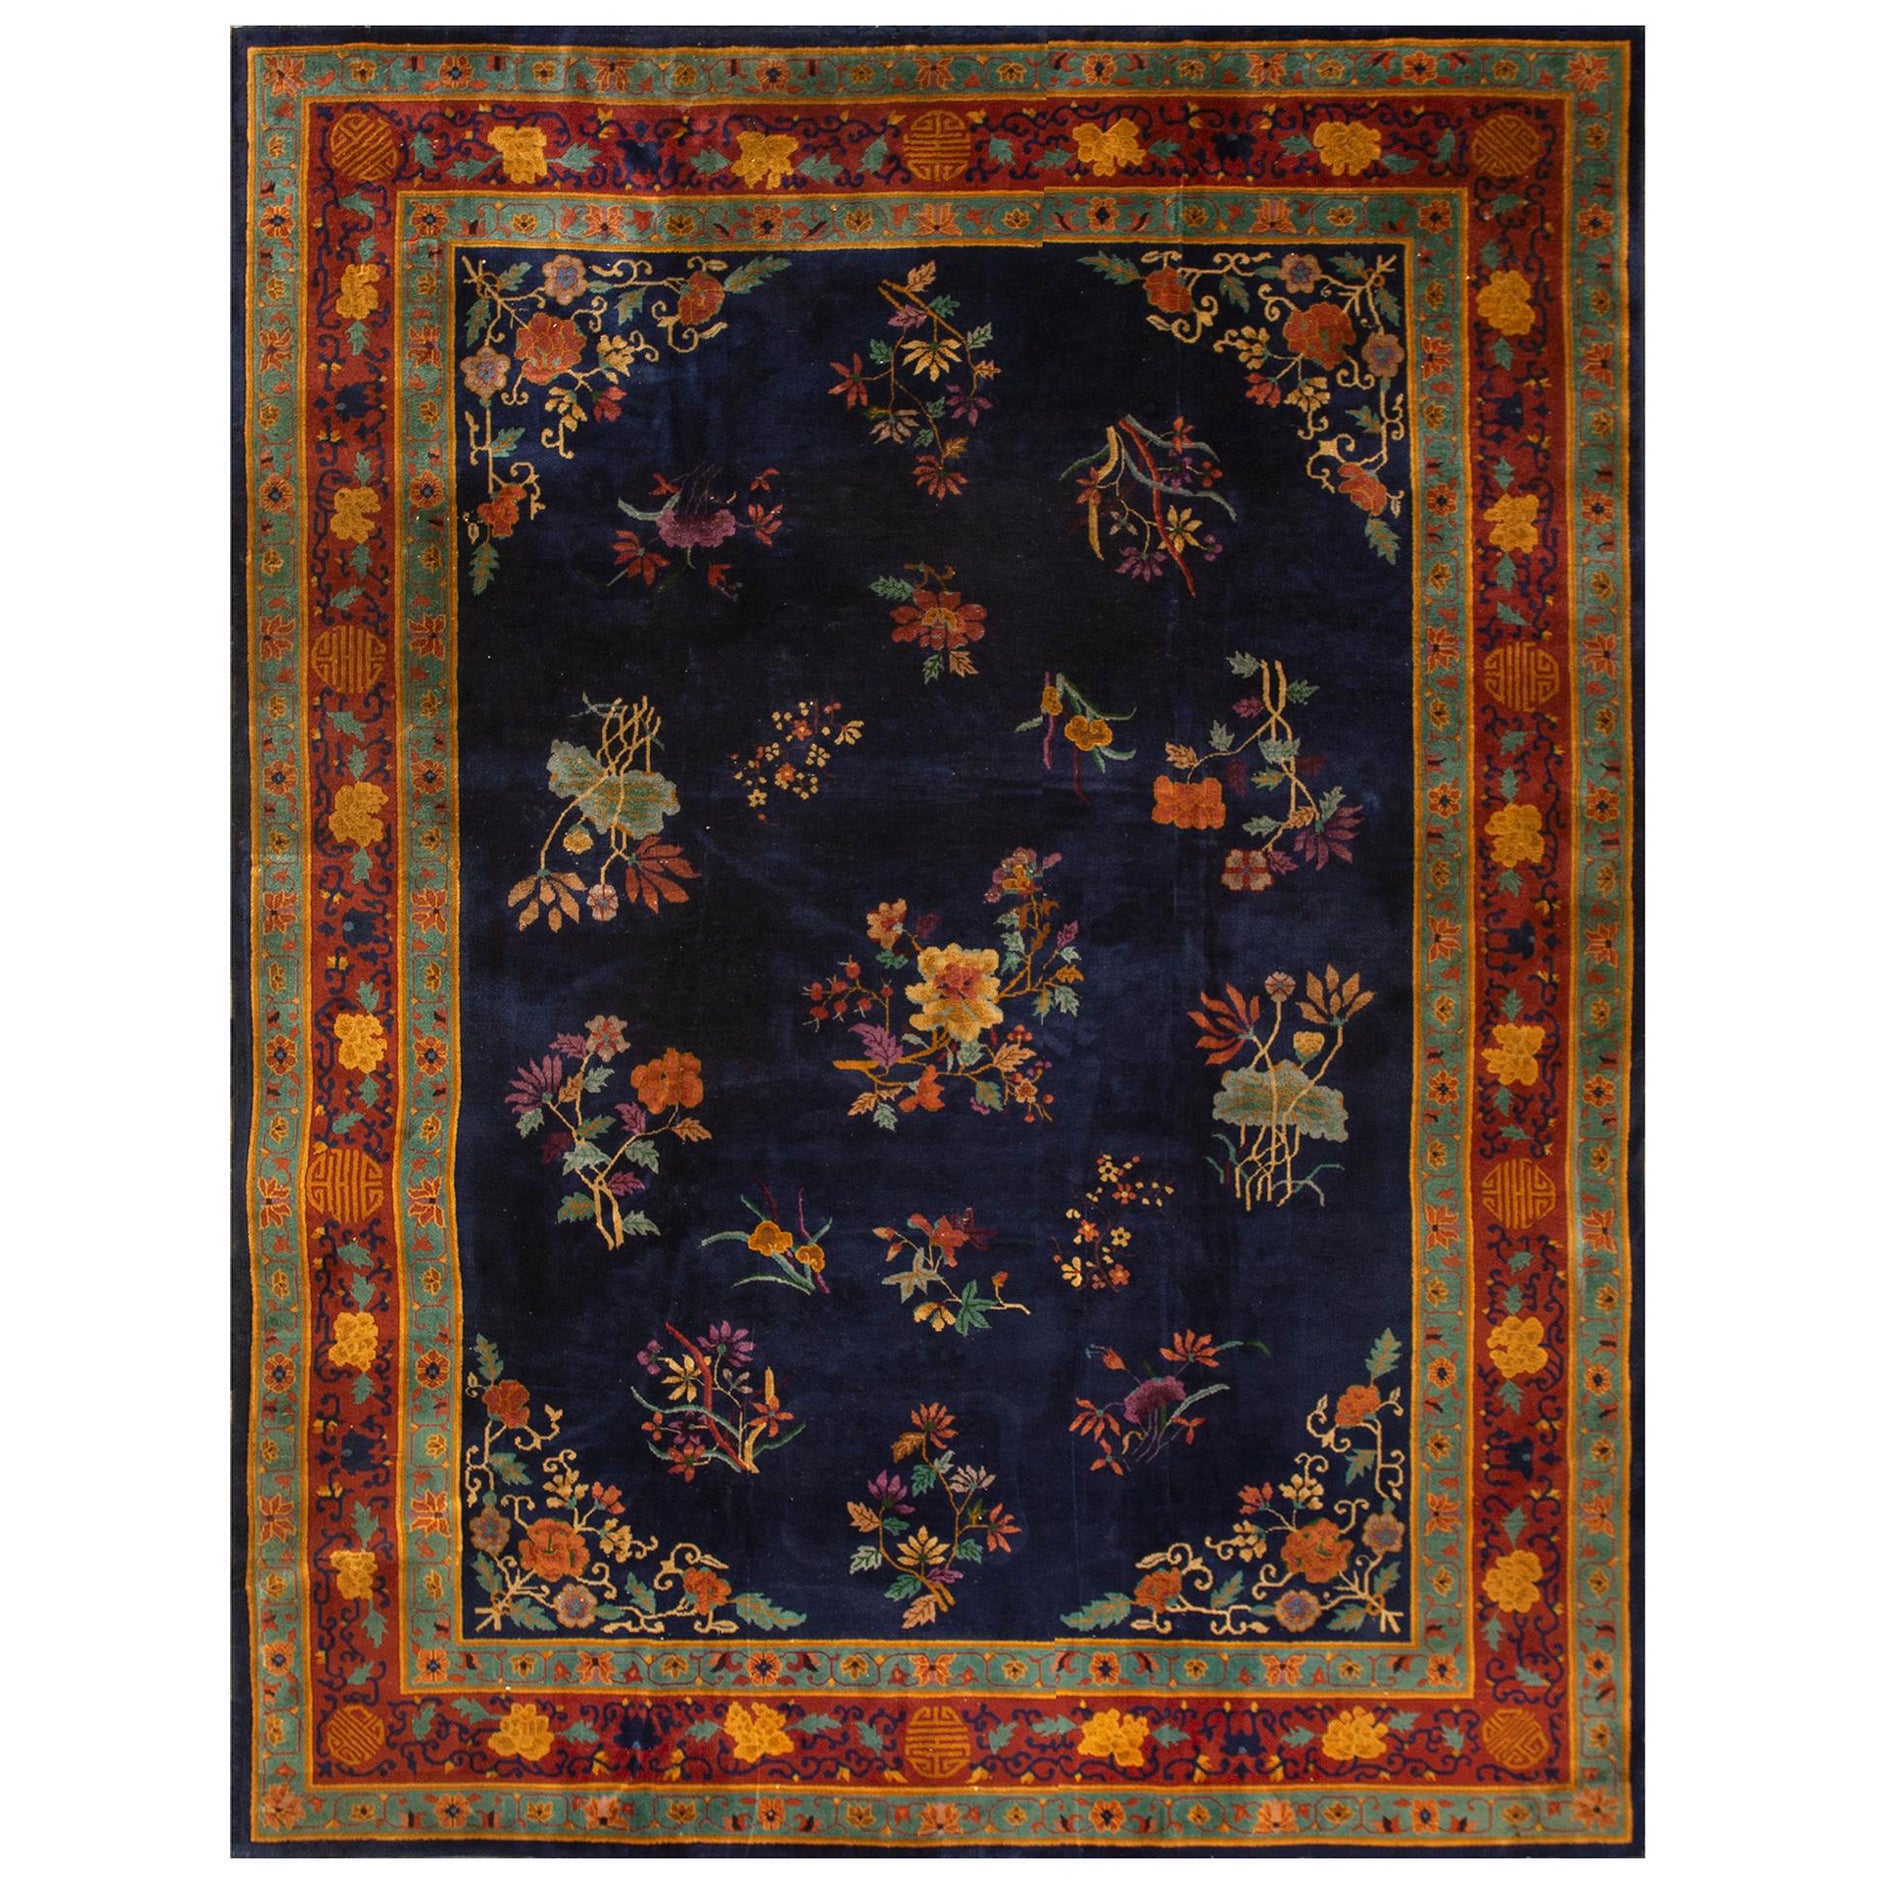 1920s Chinese Art Deco Carpet ( 8'10" x 11'7" - 269 x 353 ) For Sale